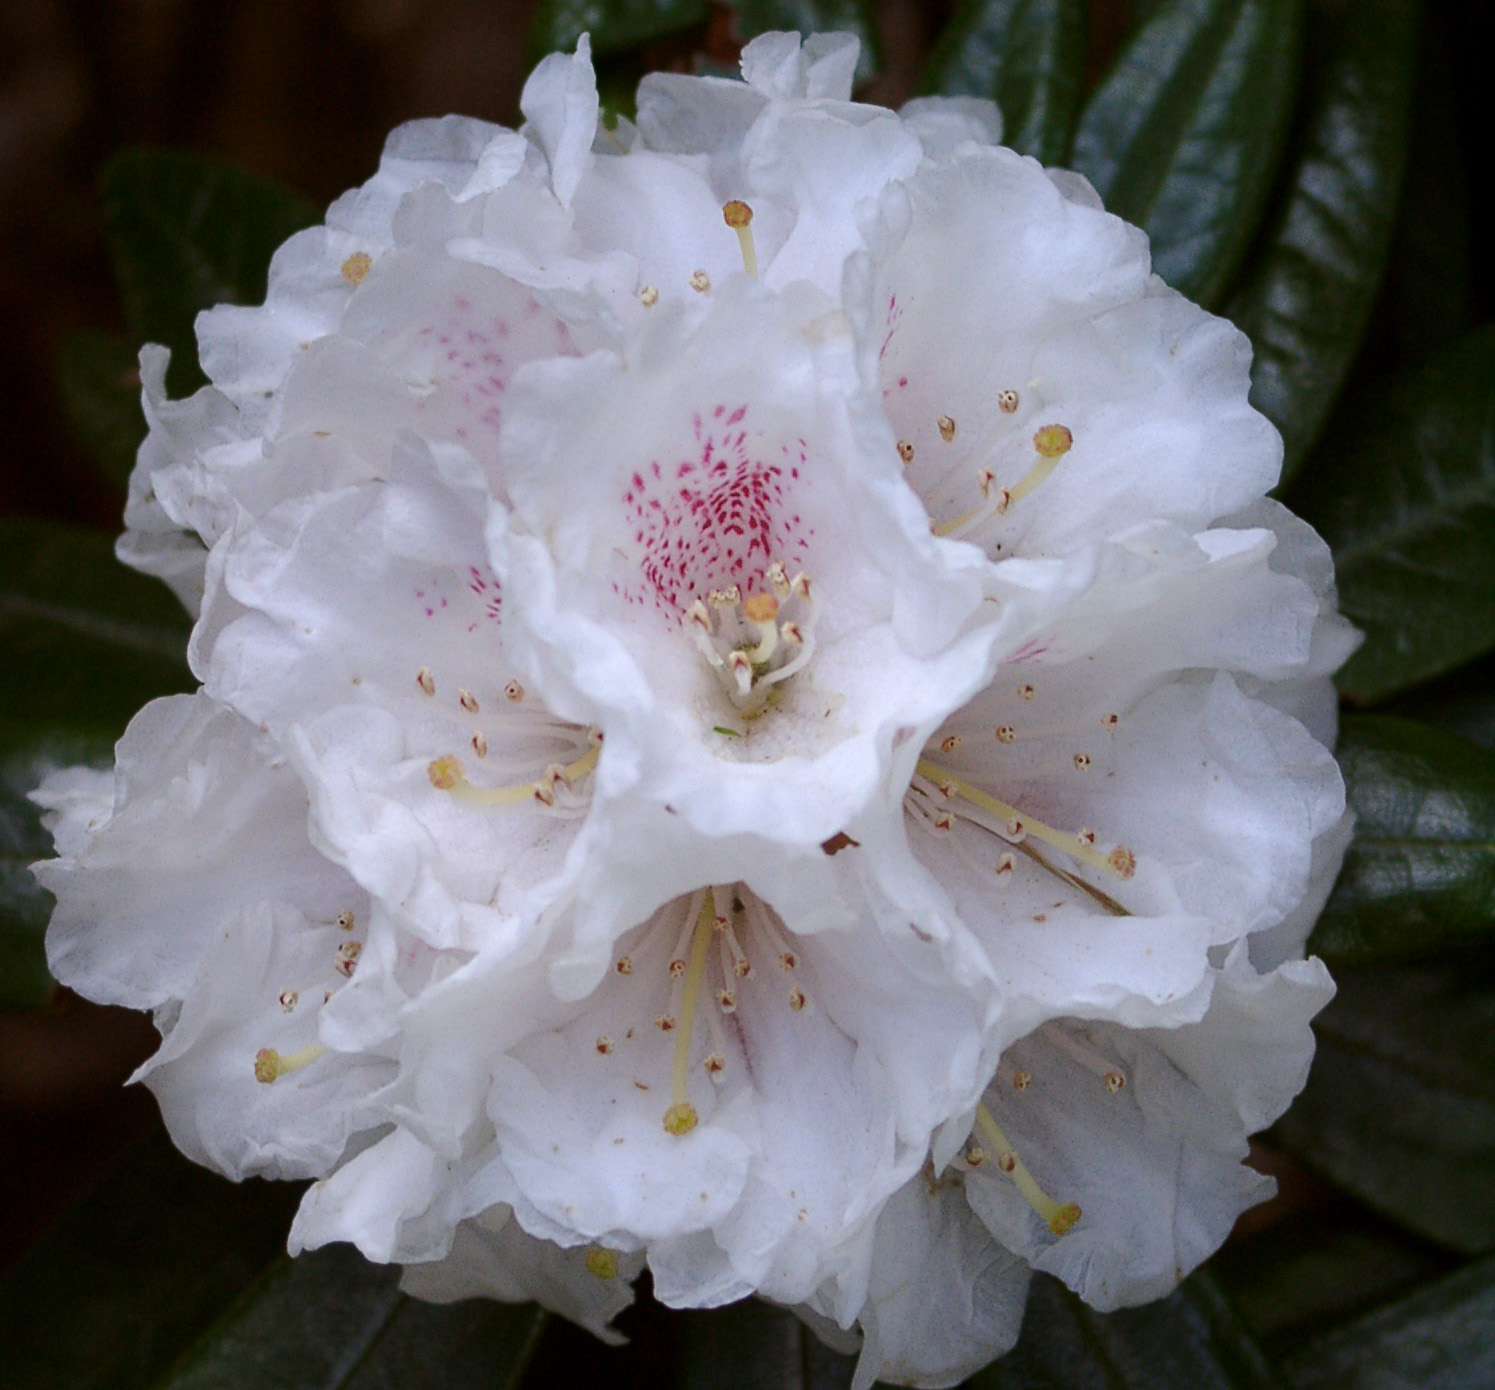 ROXIEANUM GLOBIGERUM Gp. RSF Rhododendron Larger Species Rhododendrons